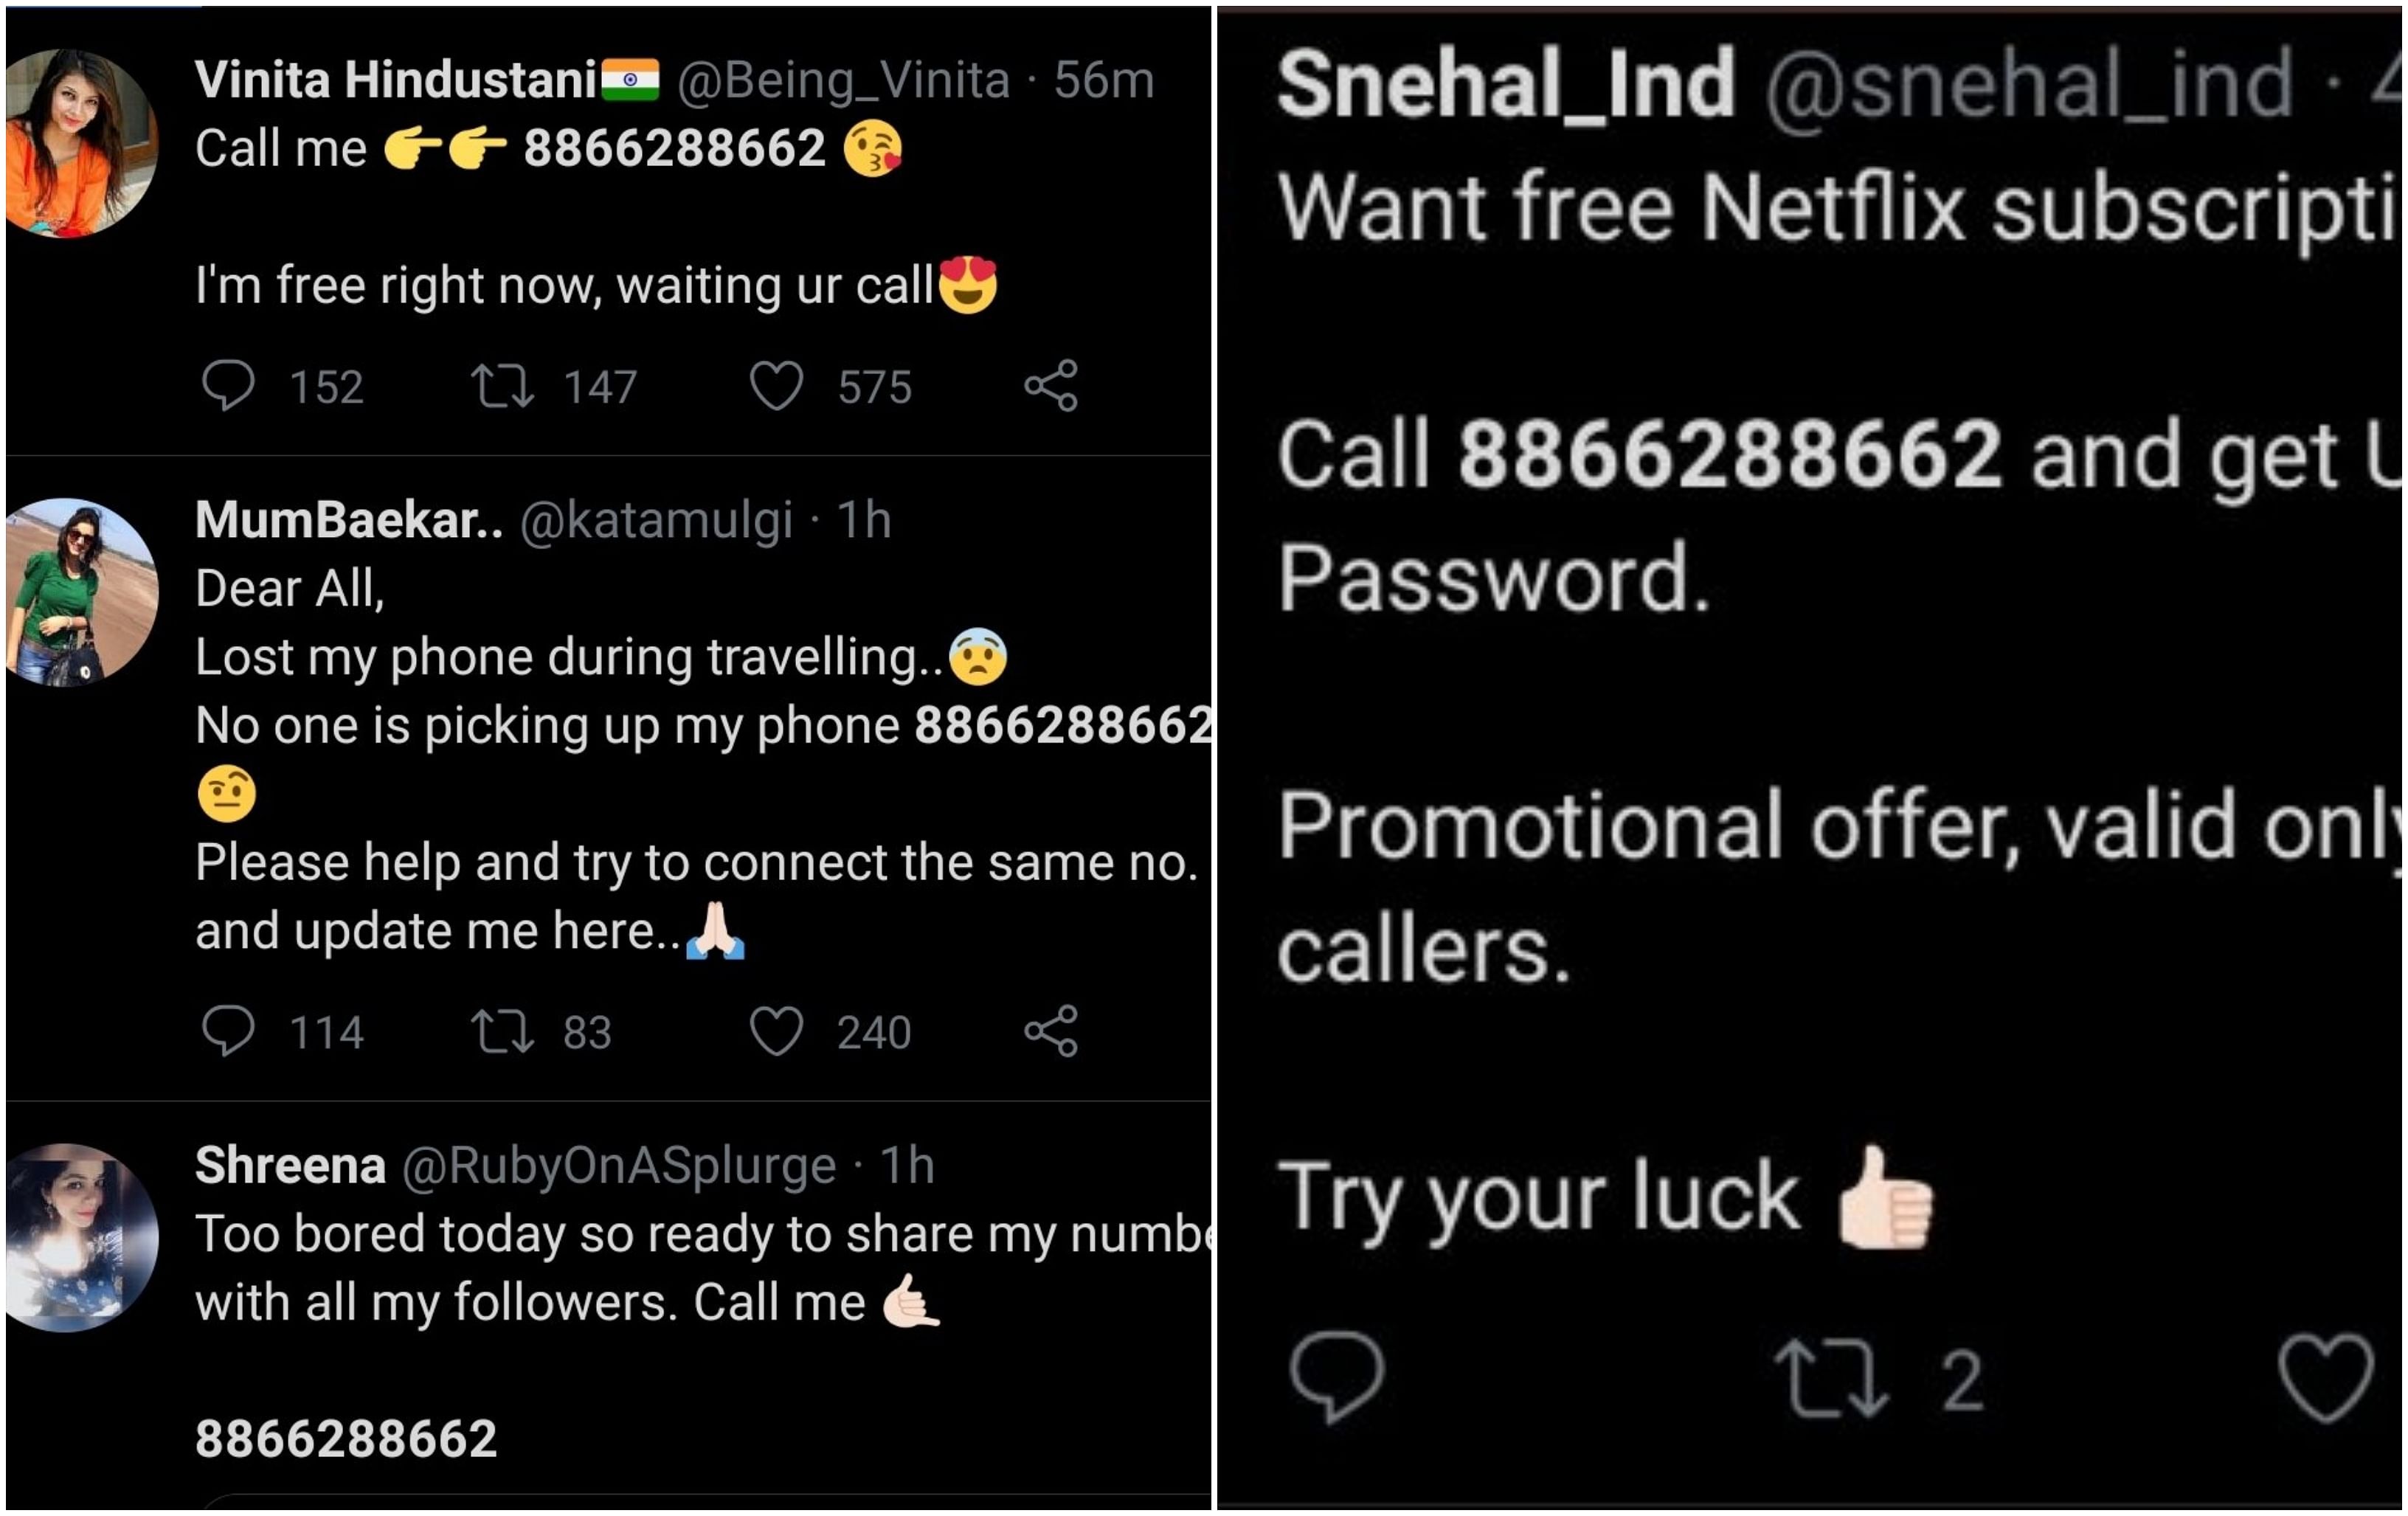 The brains behind the campaign felt 'Support CAA' was not such a great idea to inspire netizens to dial a number. So, they apparently unleashed a mindboggling range of goodies from free streaming videos to free job connections. Some tweets even linked the number to phone sex operators.